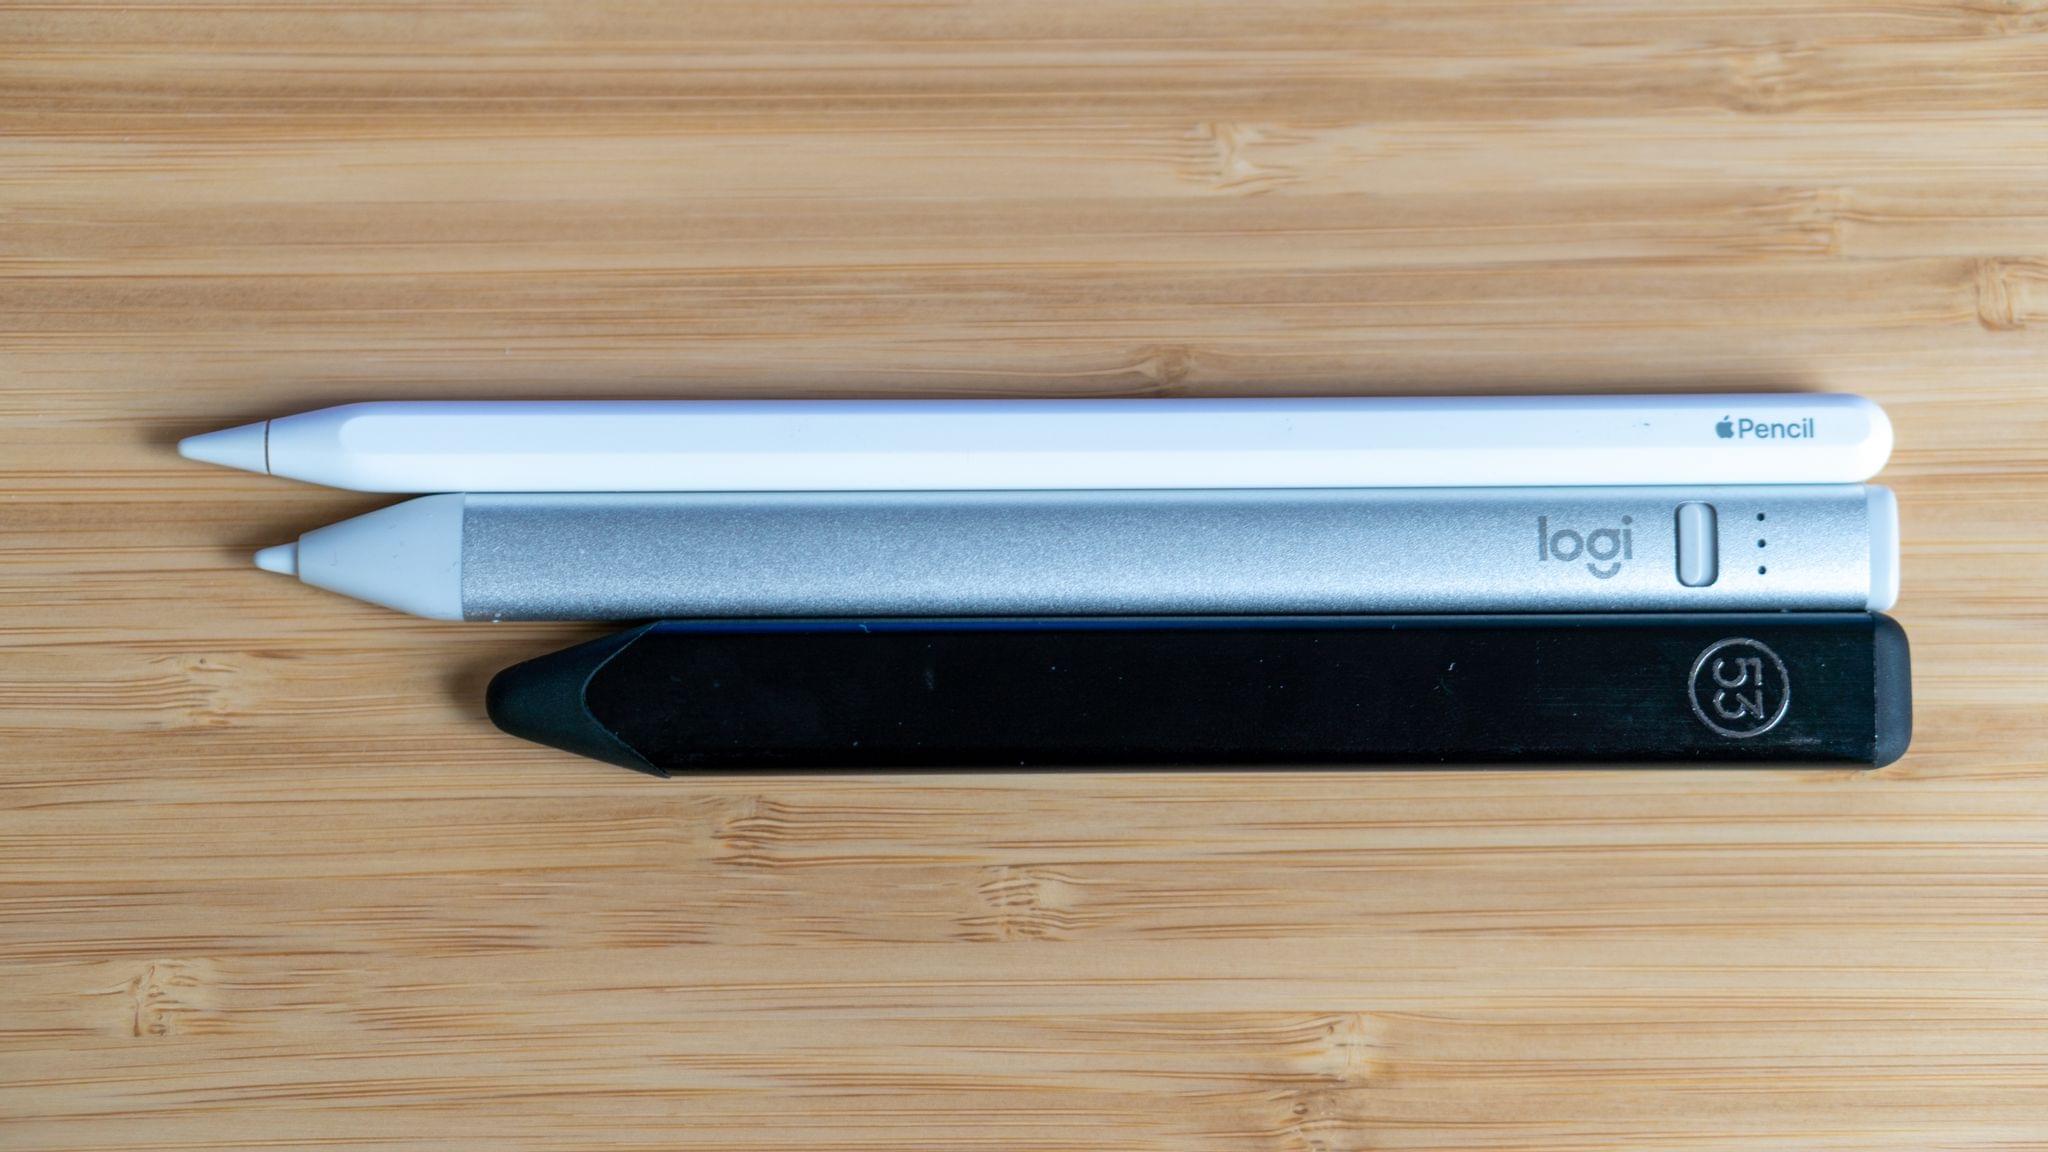 Top to Bottom: The Apple Pencil, Logitech's Crayon, and the 53 Pencil.